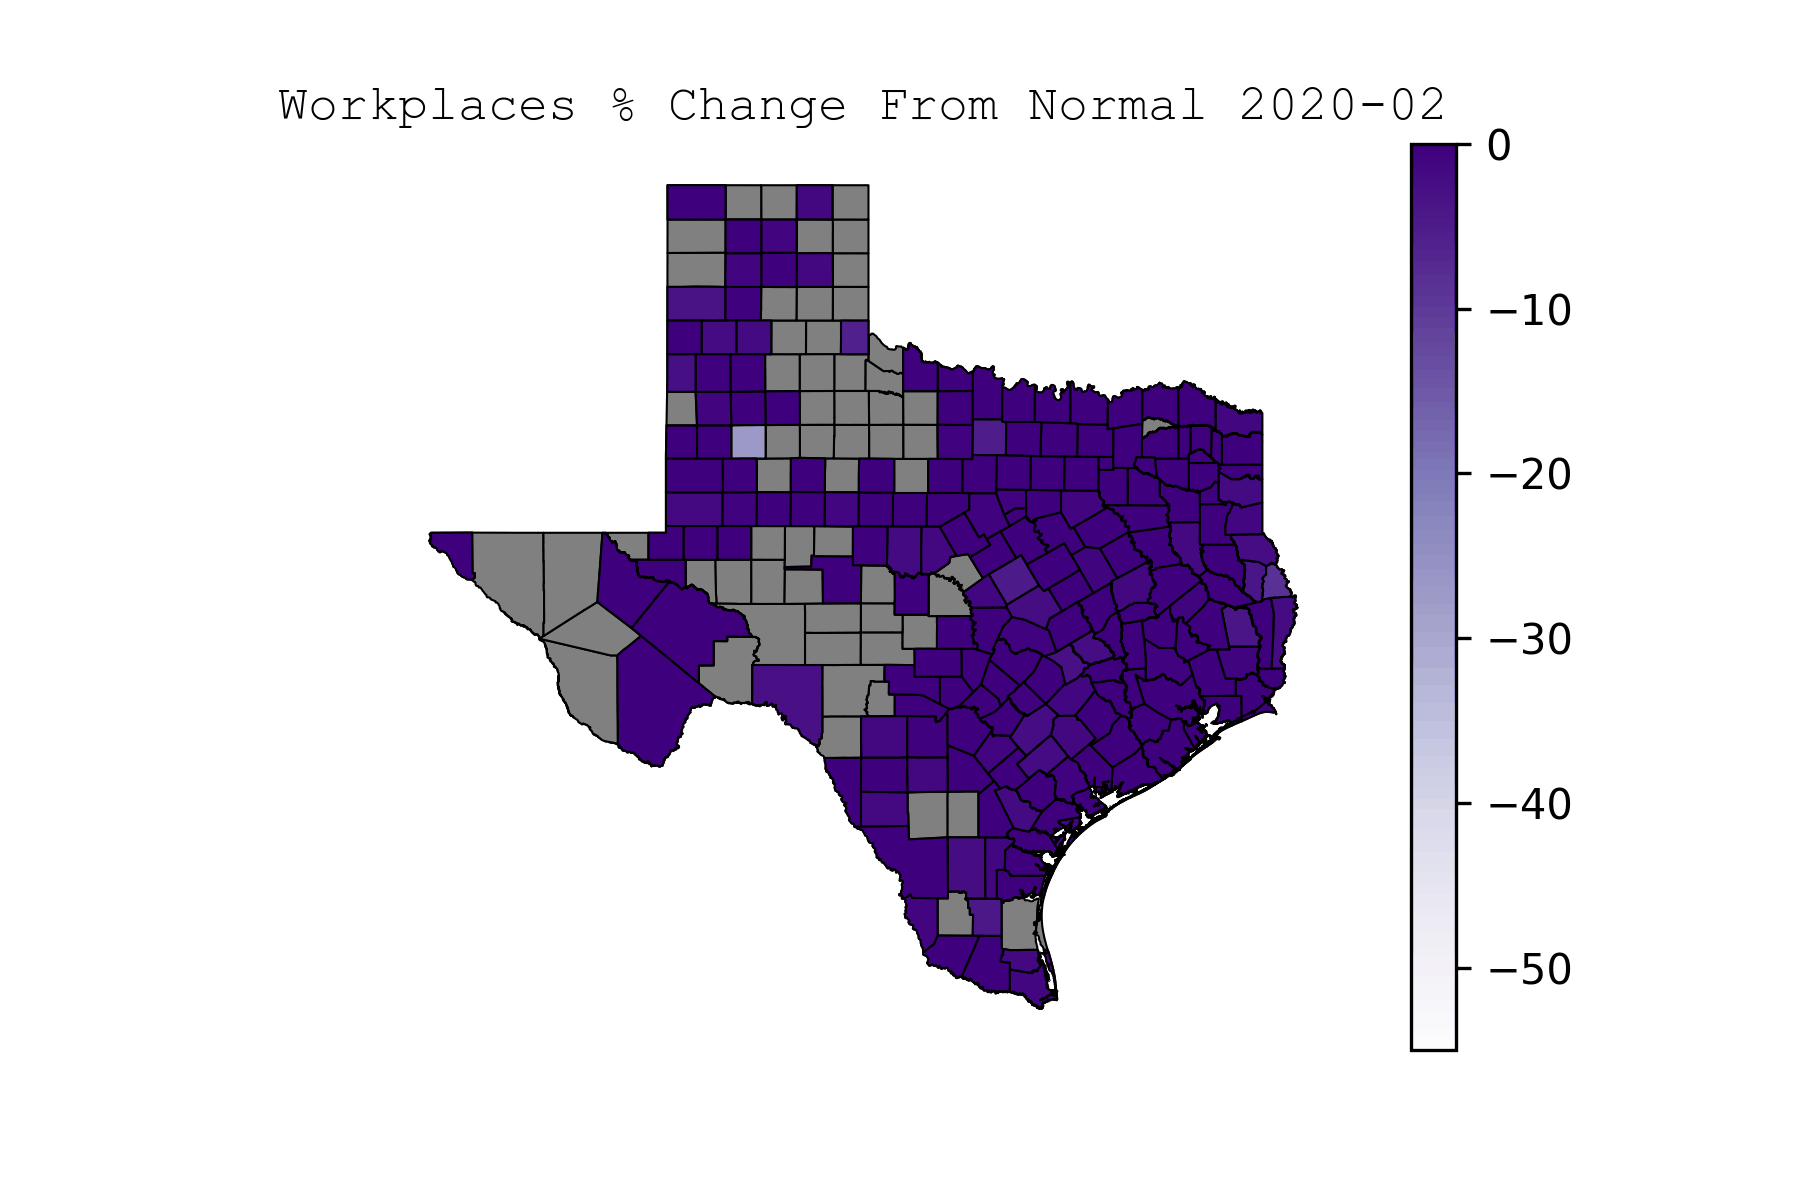 Animated choropleth map of Texas counties showing the changes to travel to workplaces caused by the COVID-19 pandemic.